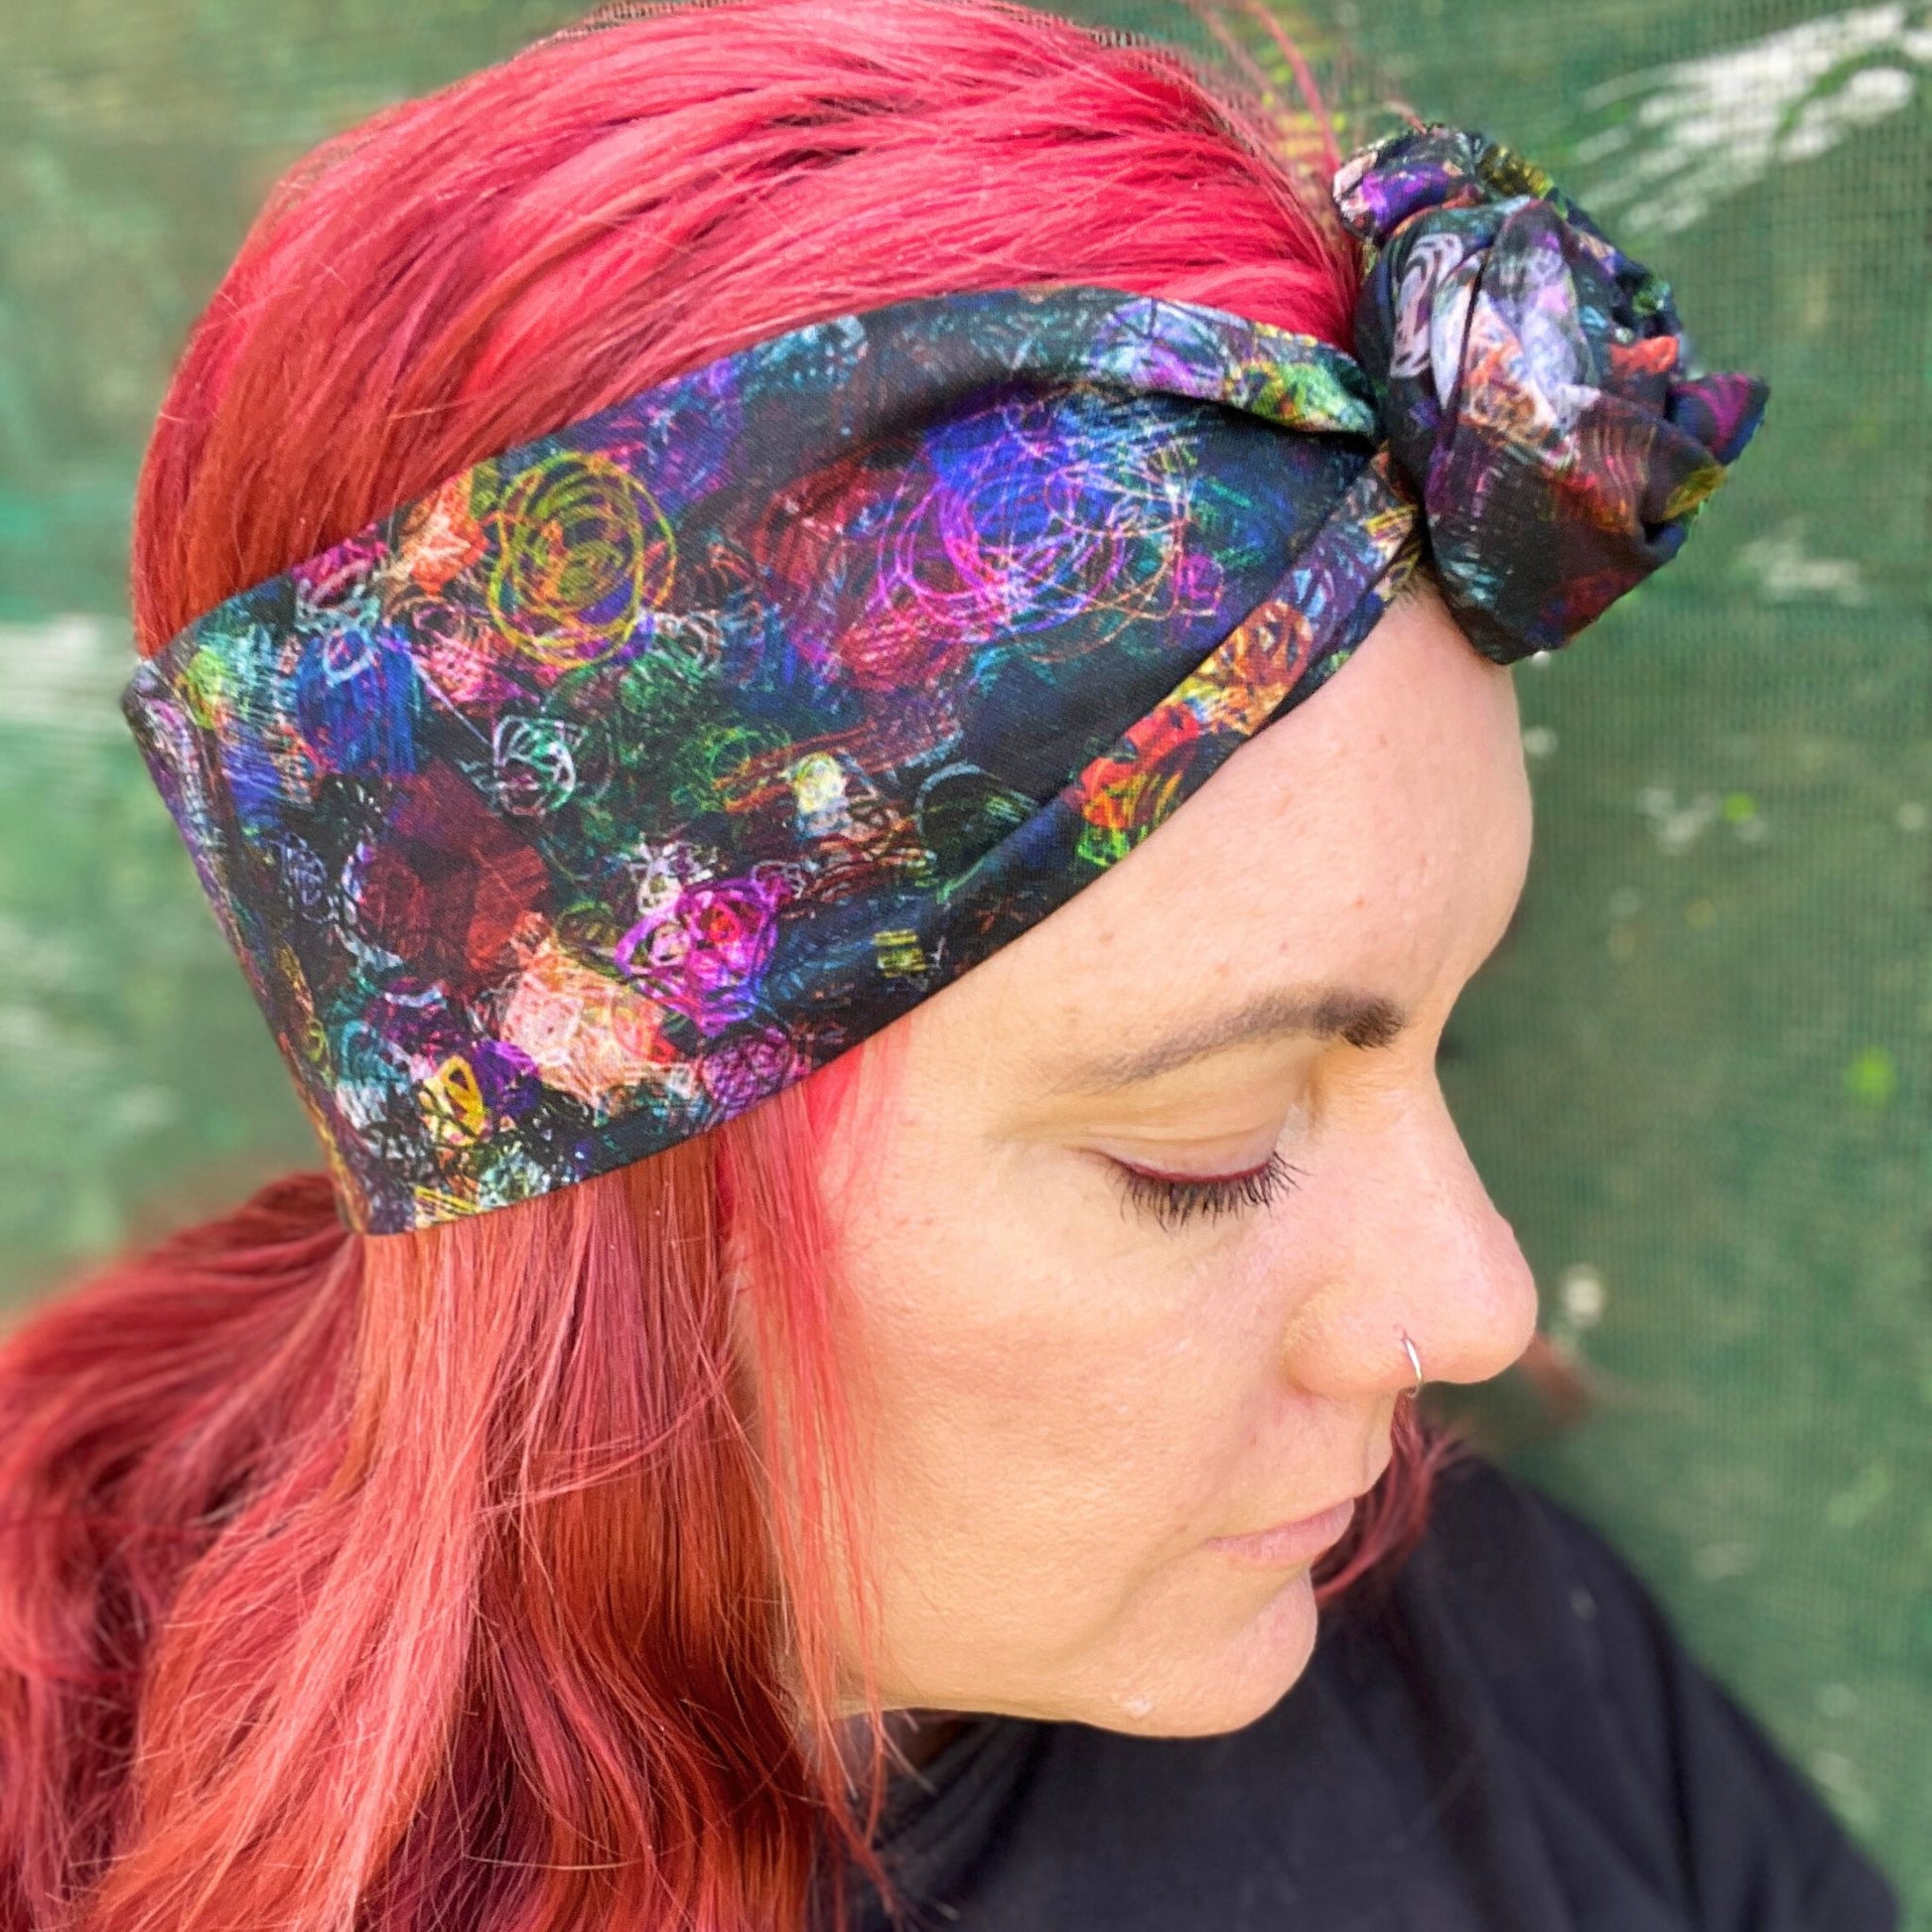 a colorful wire headwrap with a vibrant, abstract pattern. The headwrap is tied at the top, giving it a playful and chic bow effect.